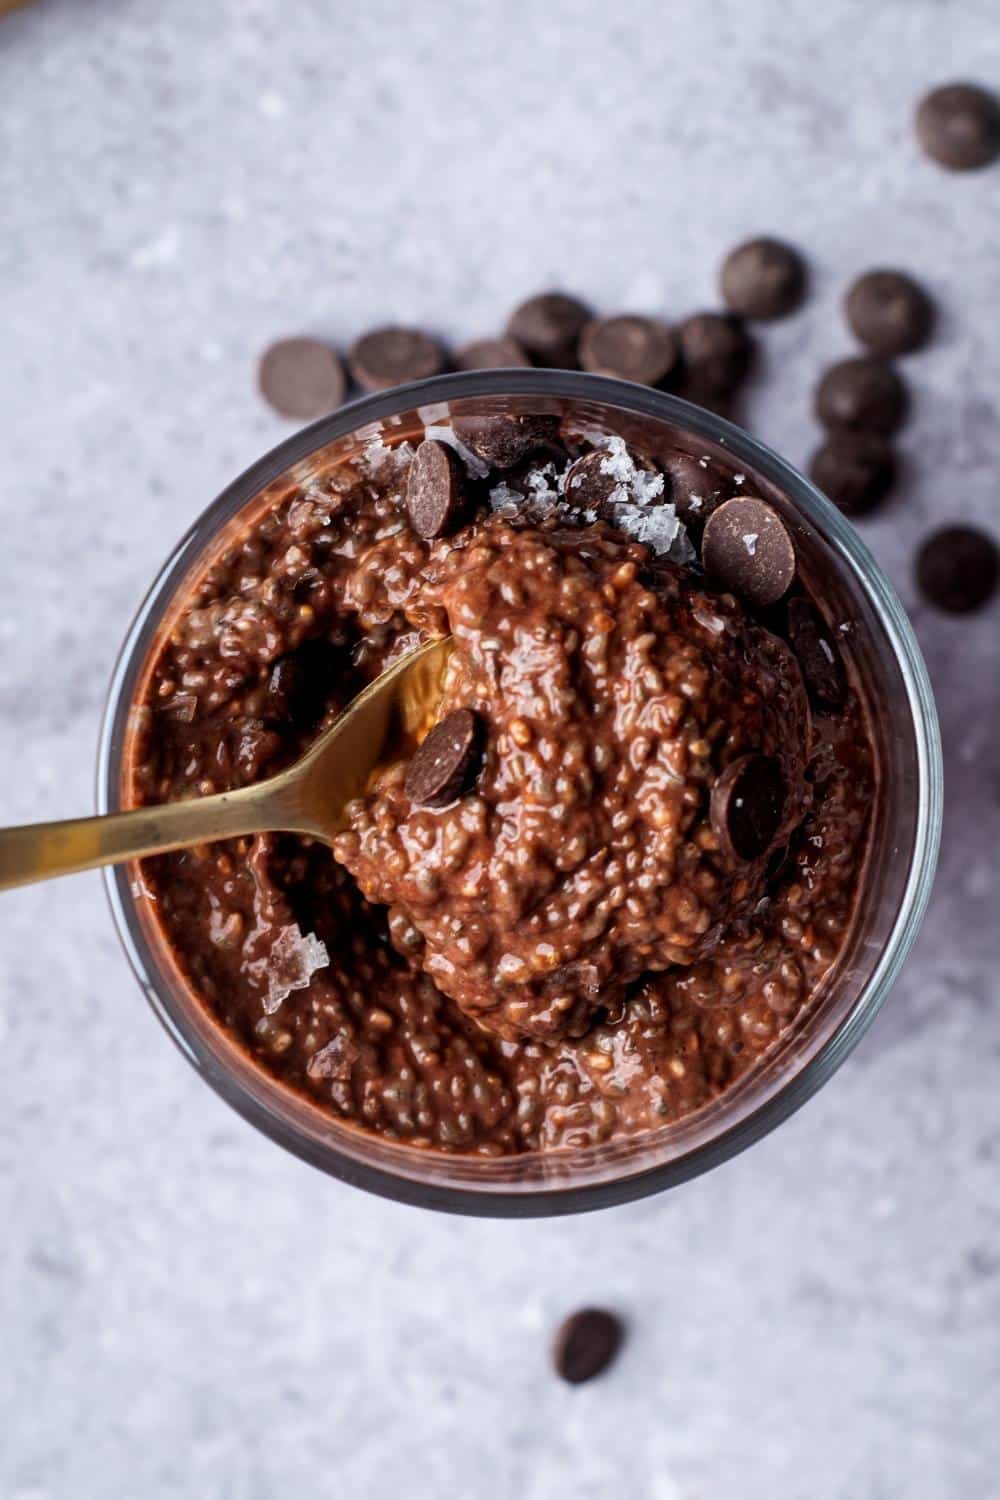 A spoon scooping chocolate protein pudding out of a glass that is filled with the pudding.